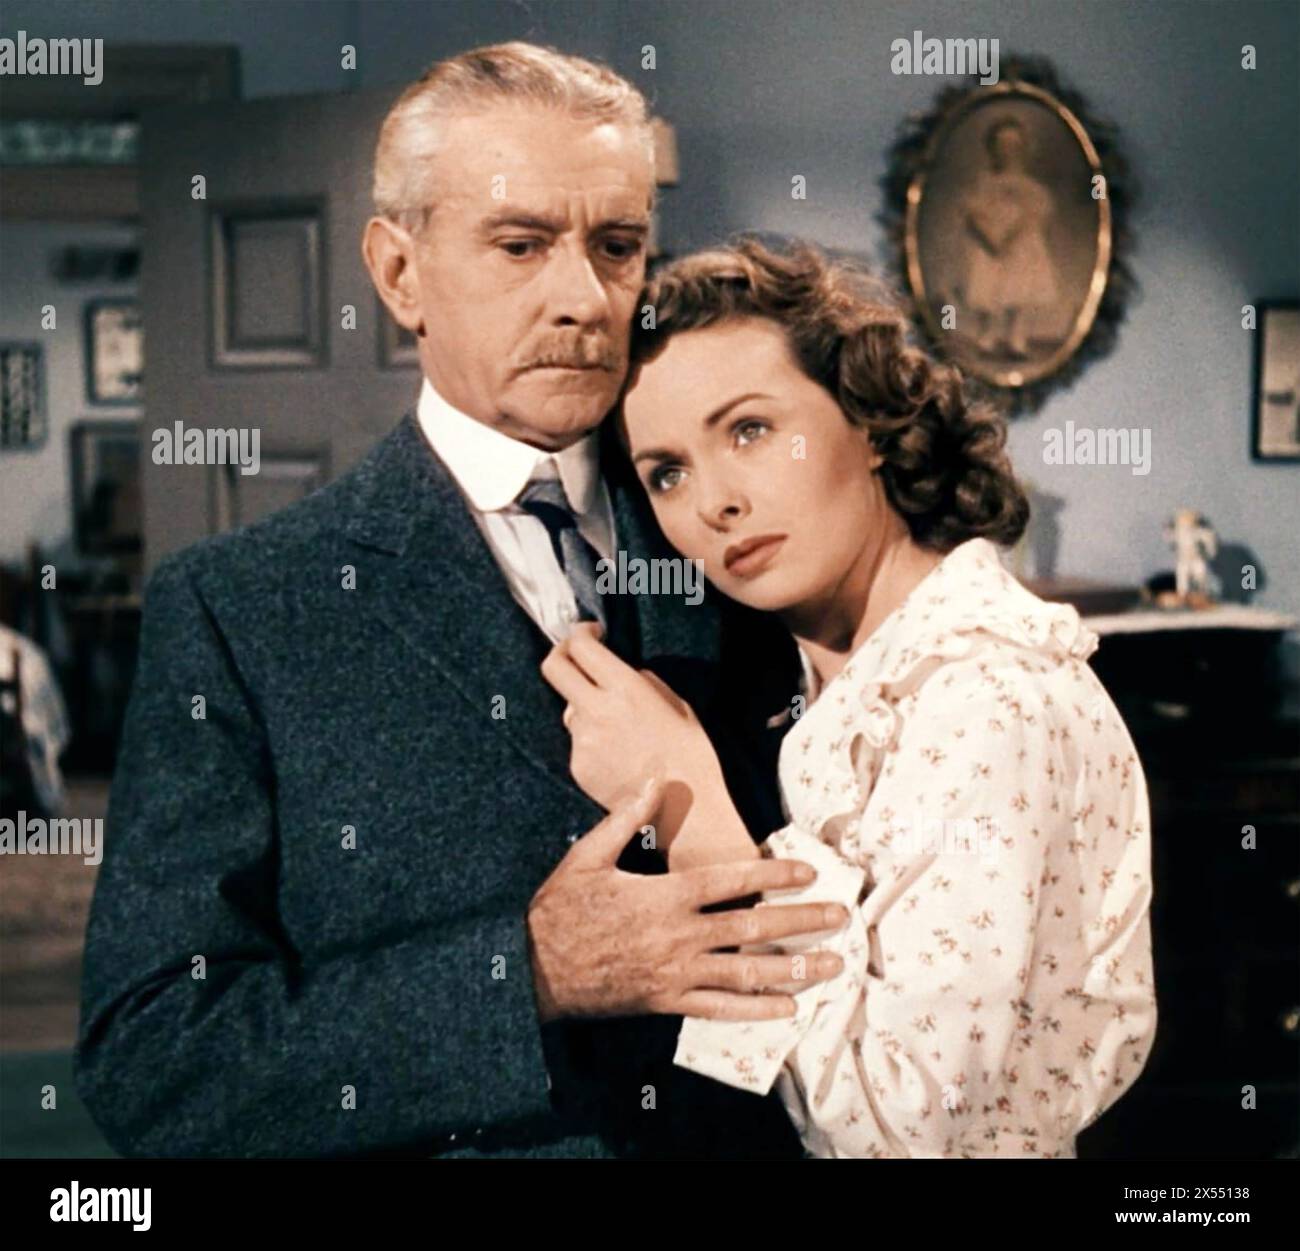 CHEAPER BY THE DOZEN 1950 20th Century Fox film with Jeanne Crain as Ann Gilbreth and Clifton Webb as Frank Gilbreth Stock Photo